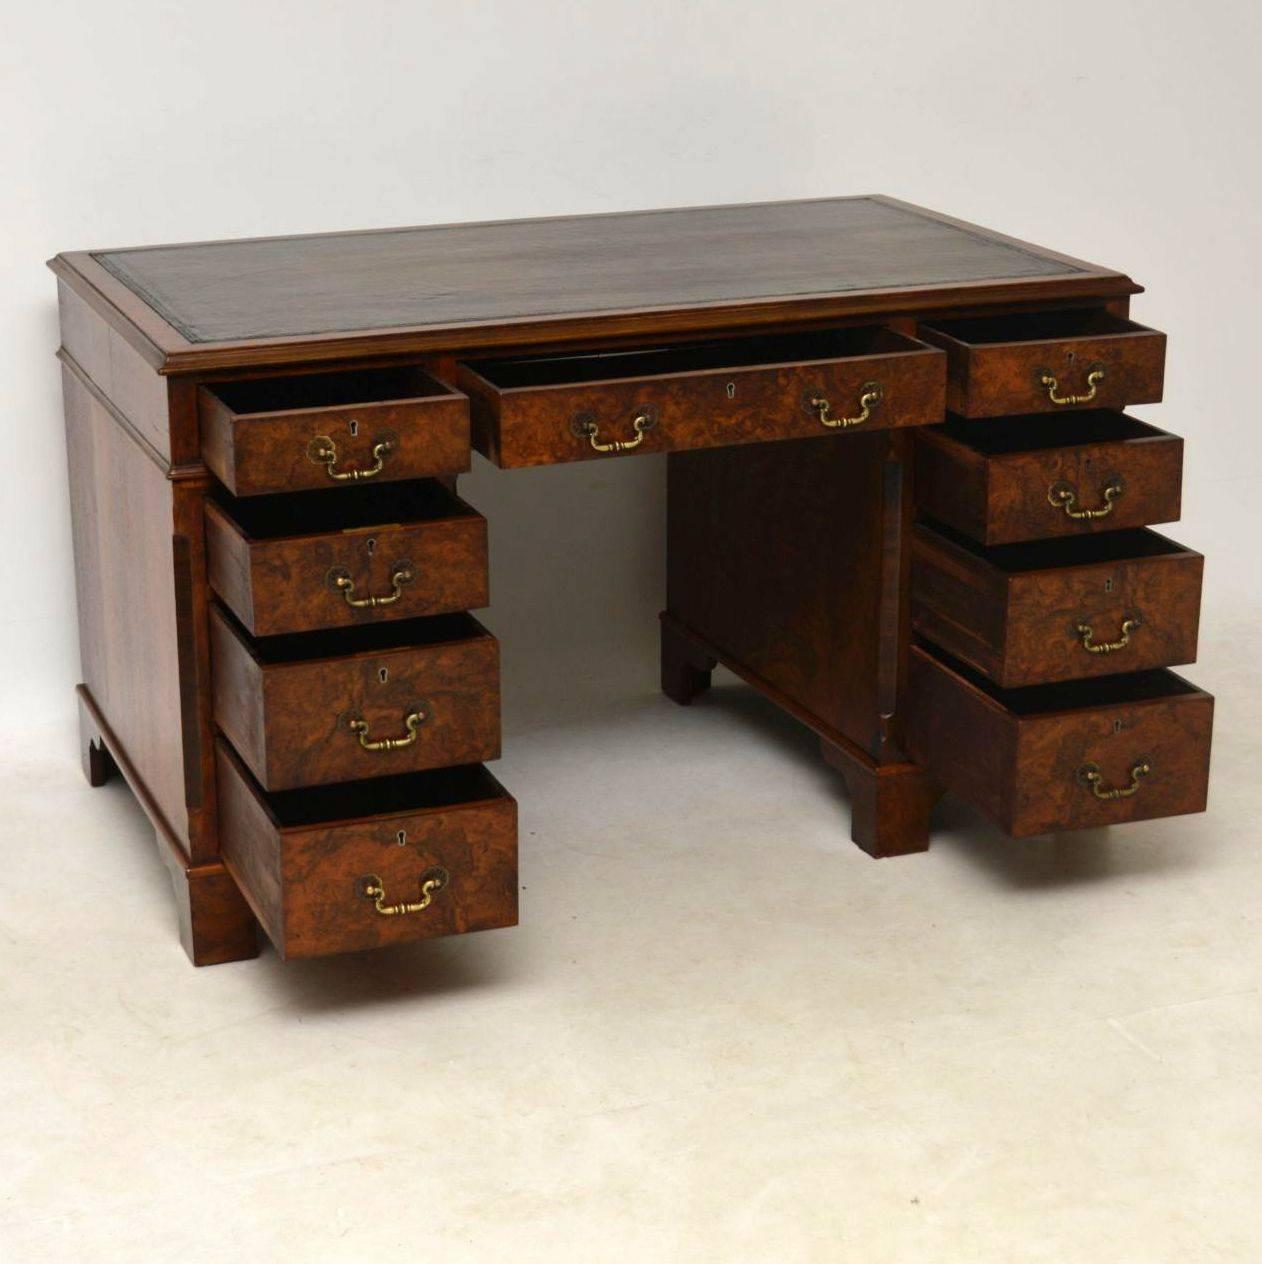 Very impressive antique walnut leather top pedestal desk which separates into three sections for easy transportation. The top has a tooled hand coloured leather writing surface, surrounded by a burr walnut edge. All the drawers are graduated in